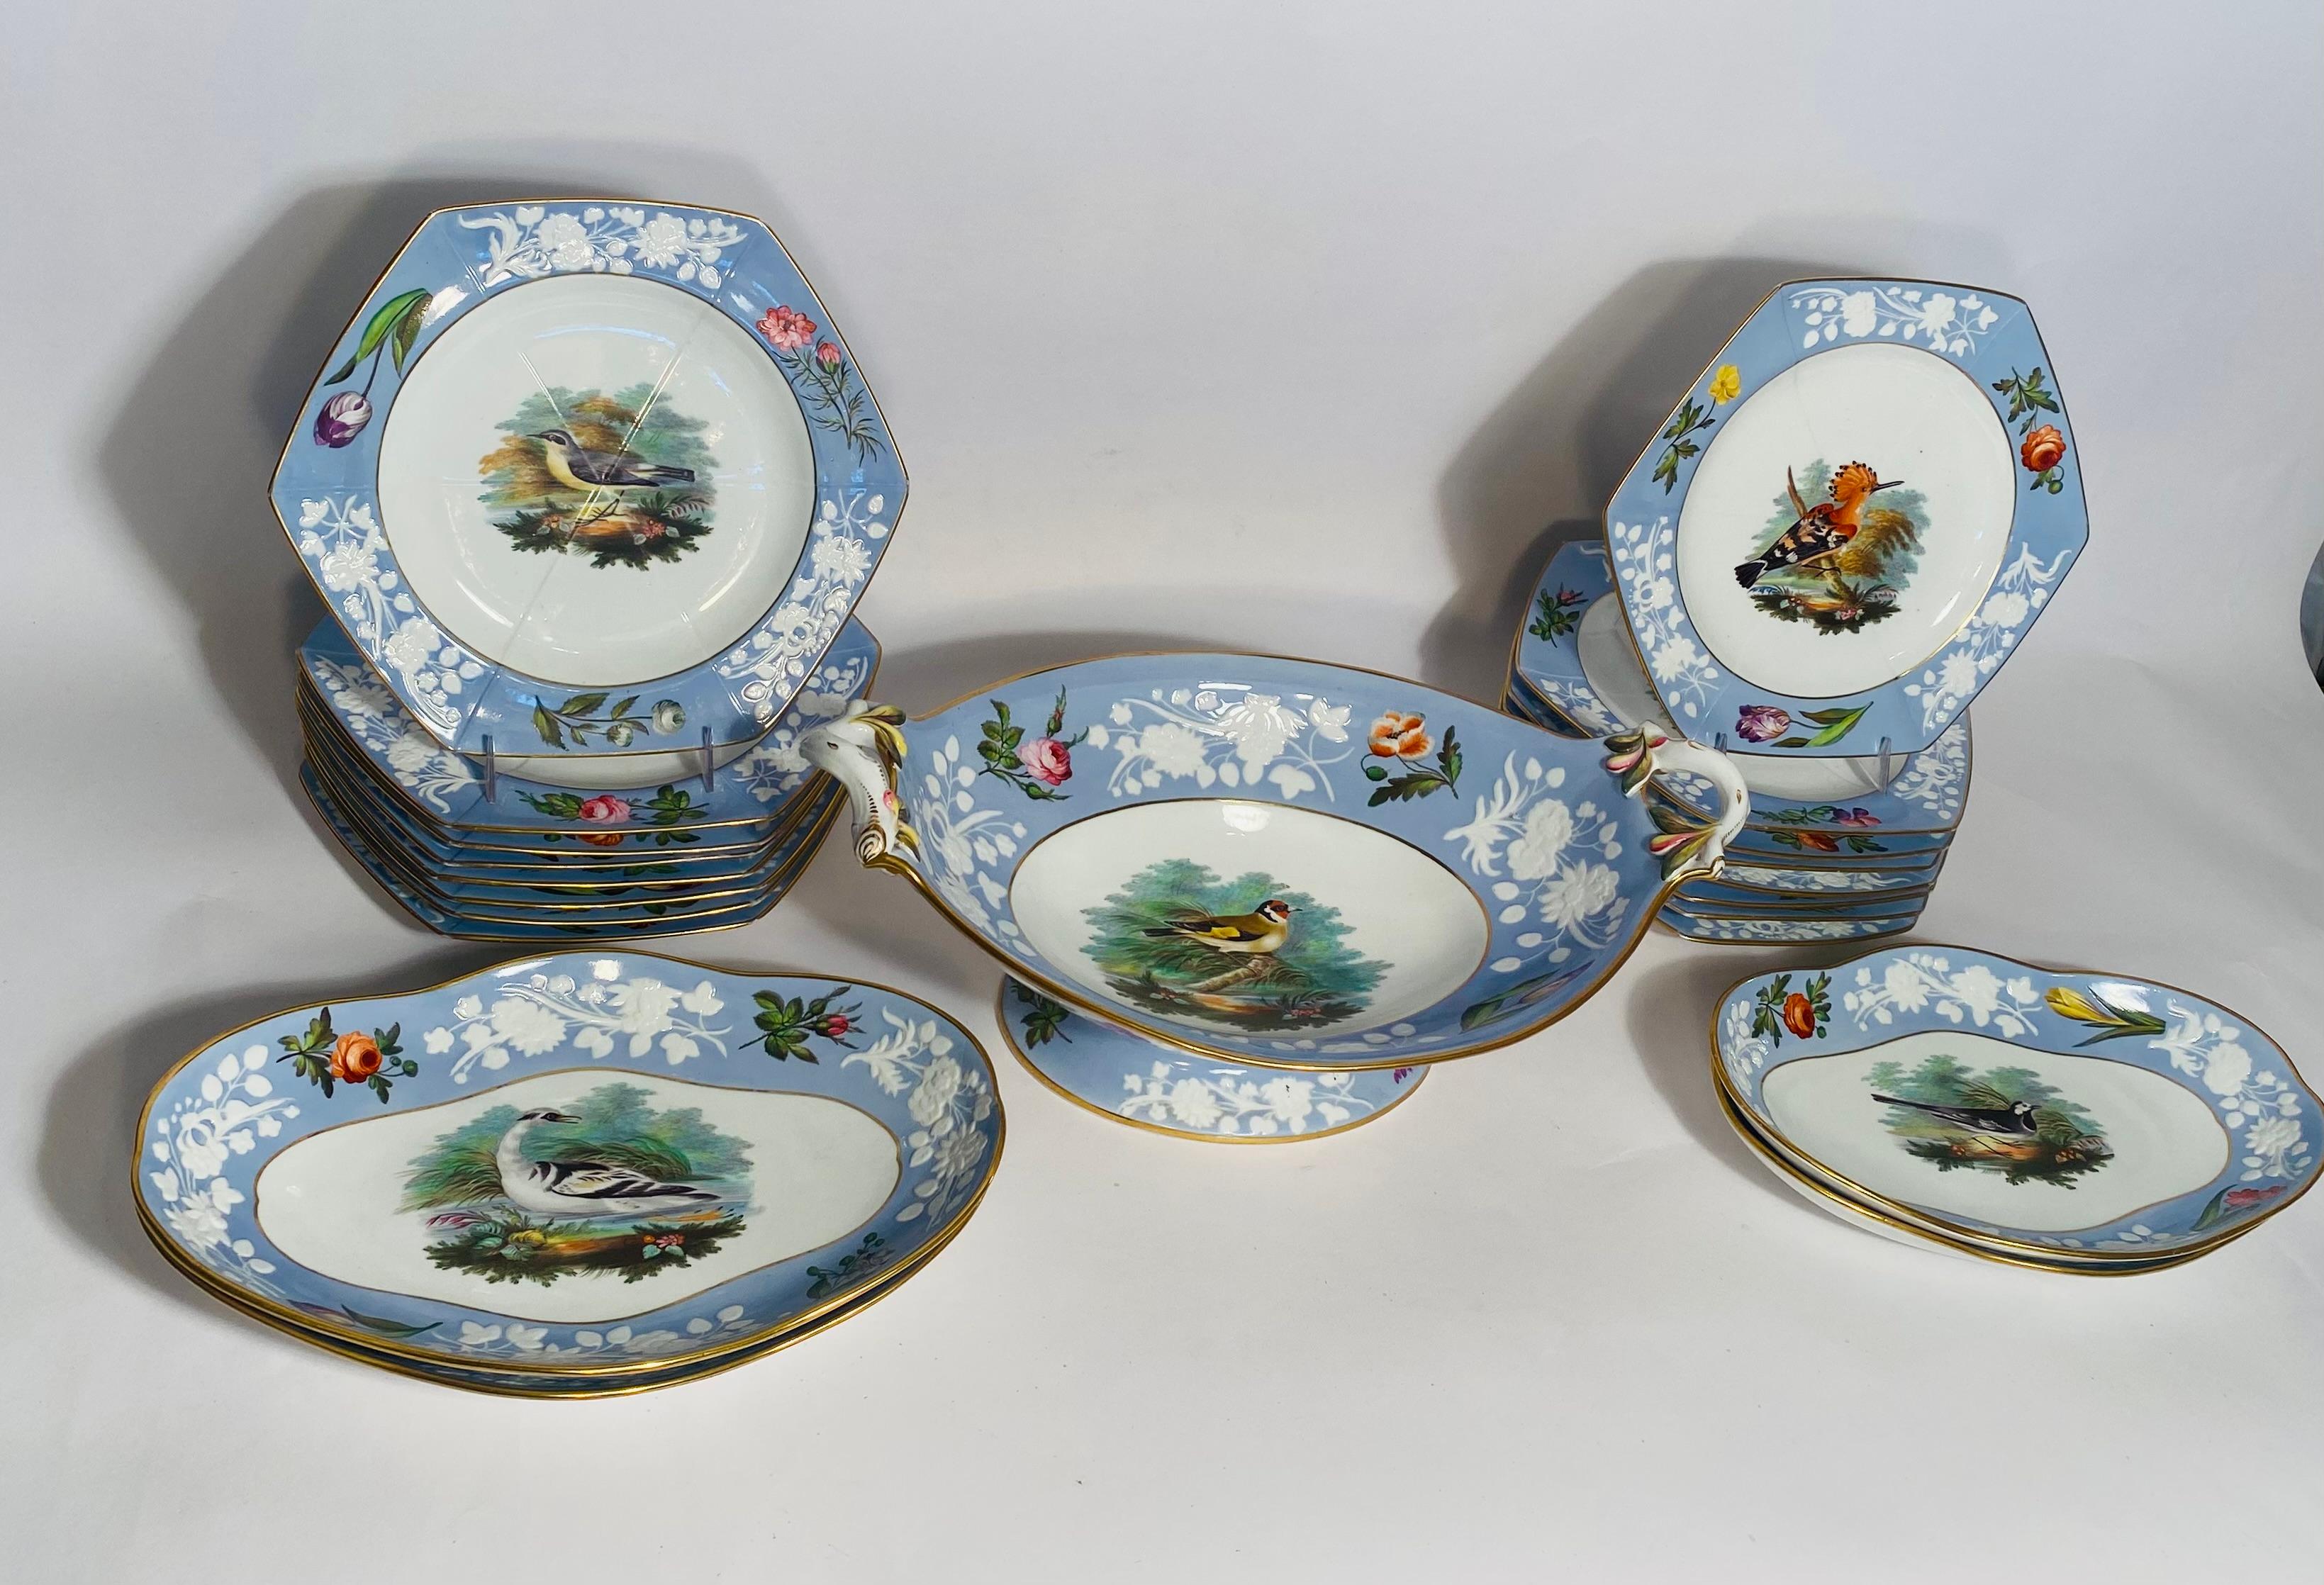 Antique English Periwinkle Blue Dessert Service for 16, Spode Circa 1820  For Sale 1